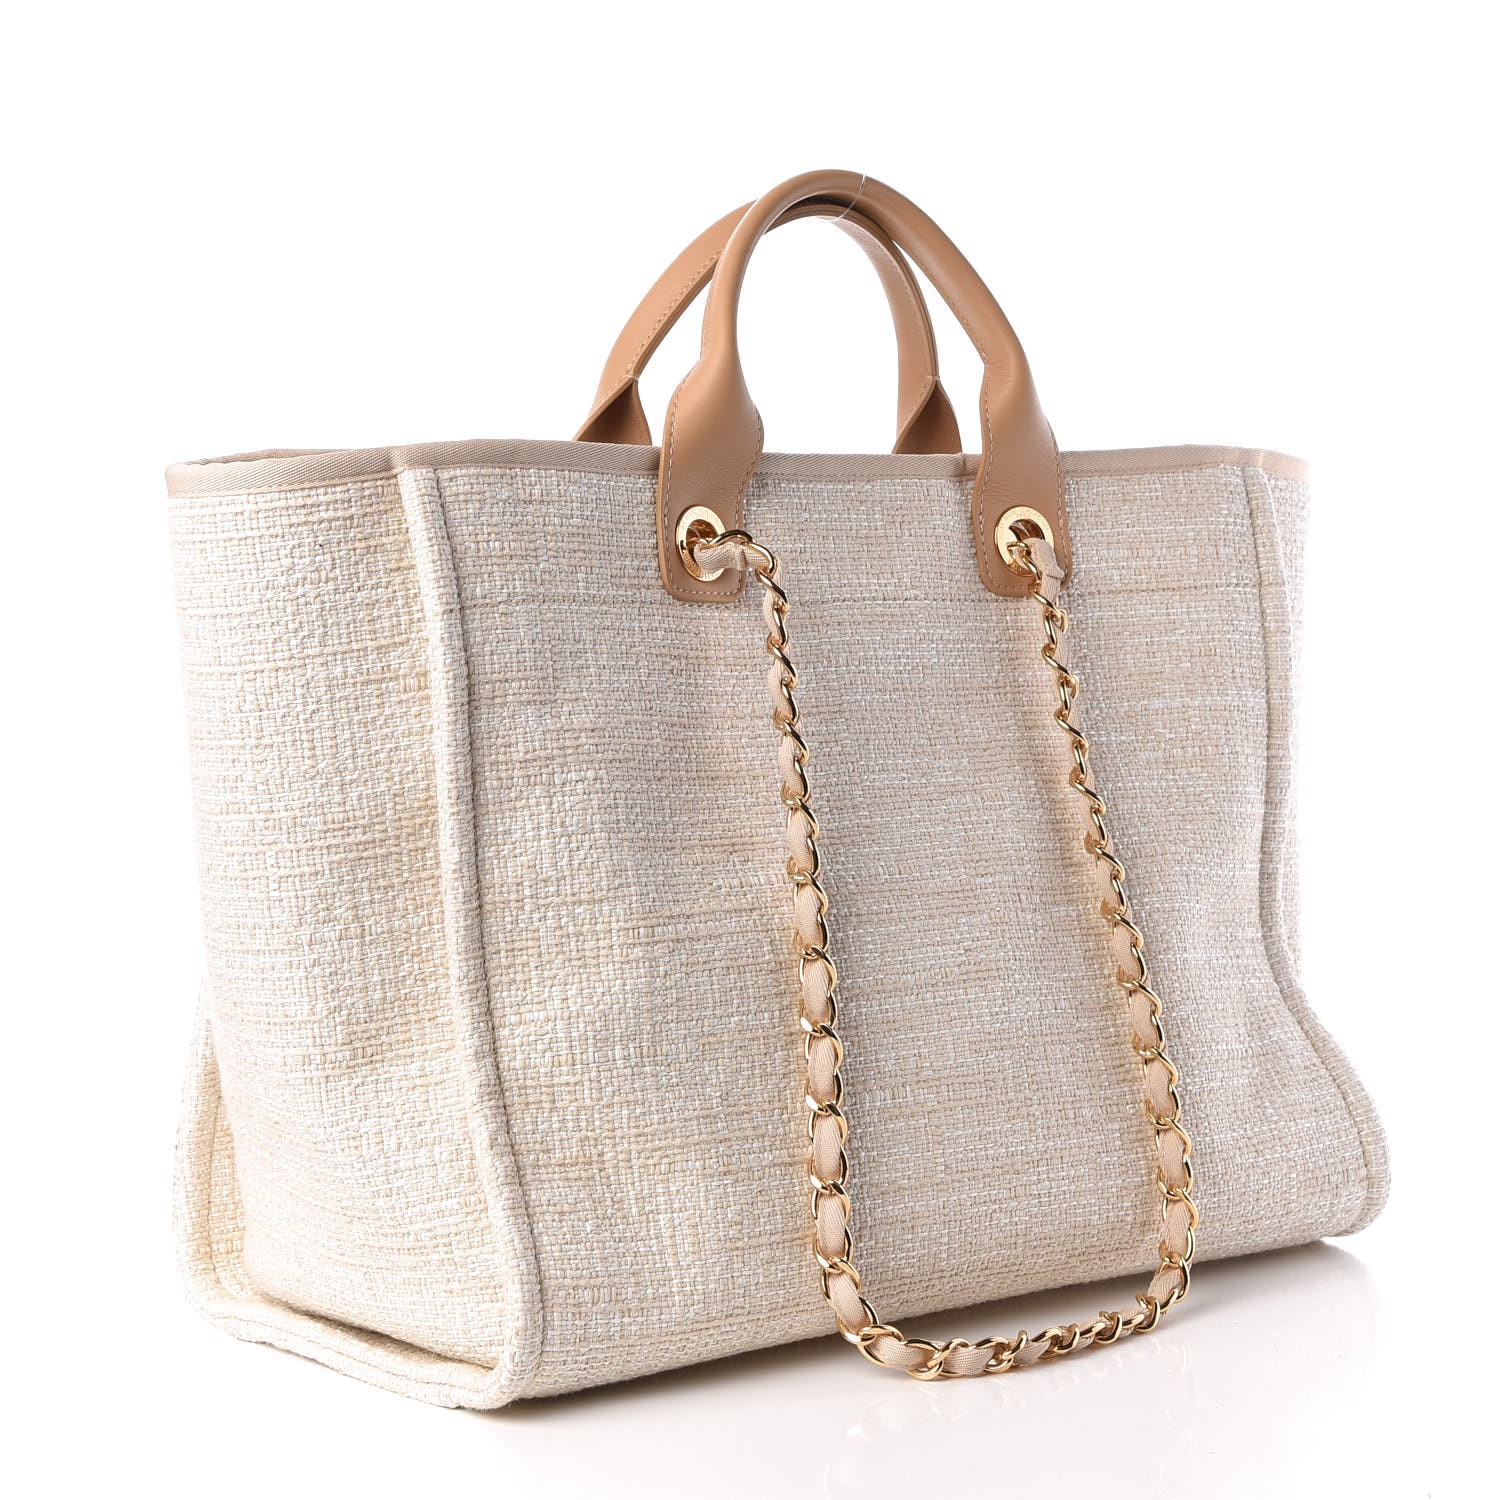 CHANEL Canvas Large Deauville Tote Light Beige 325230